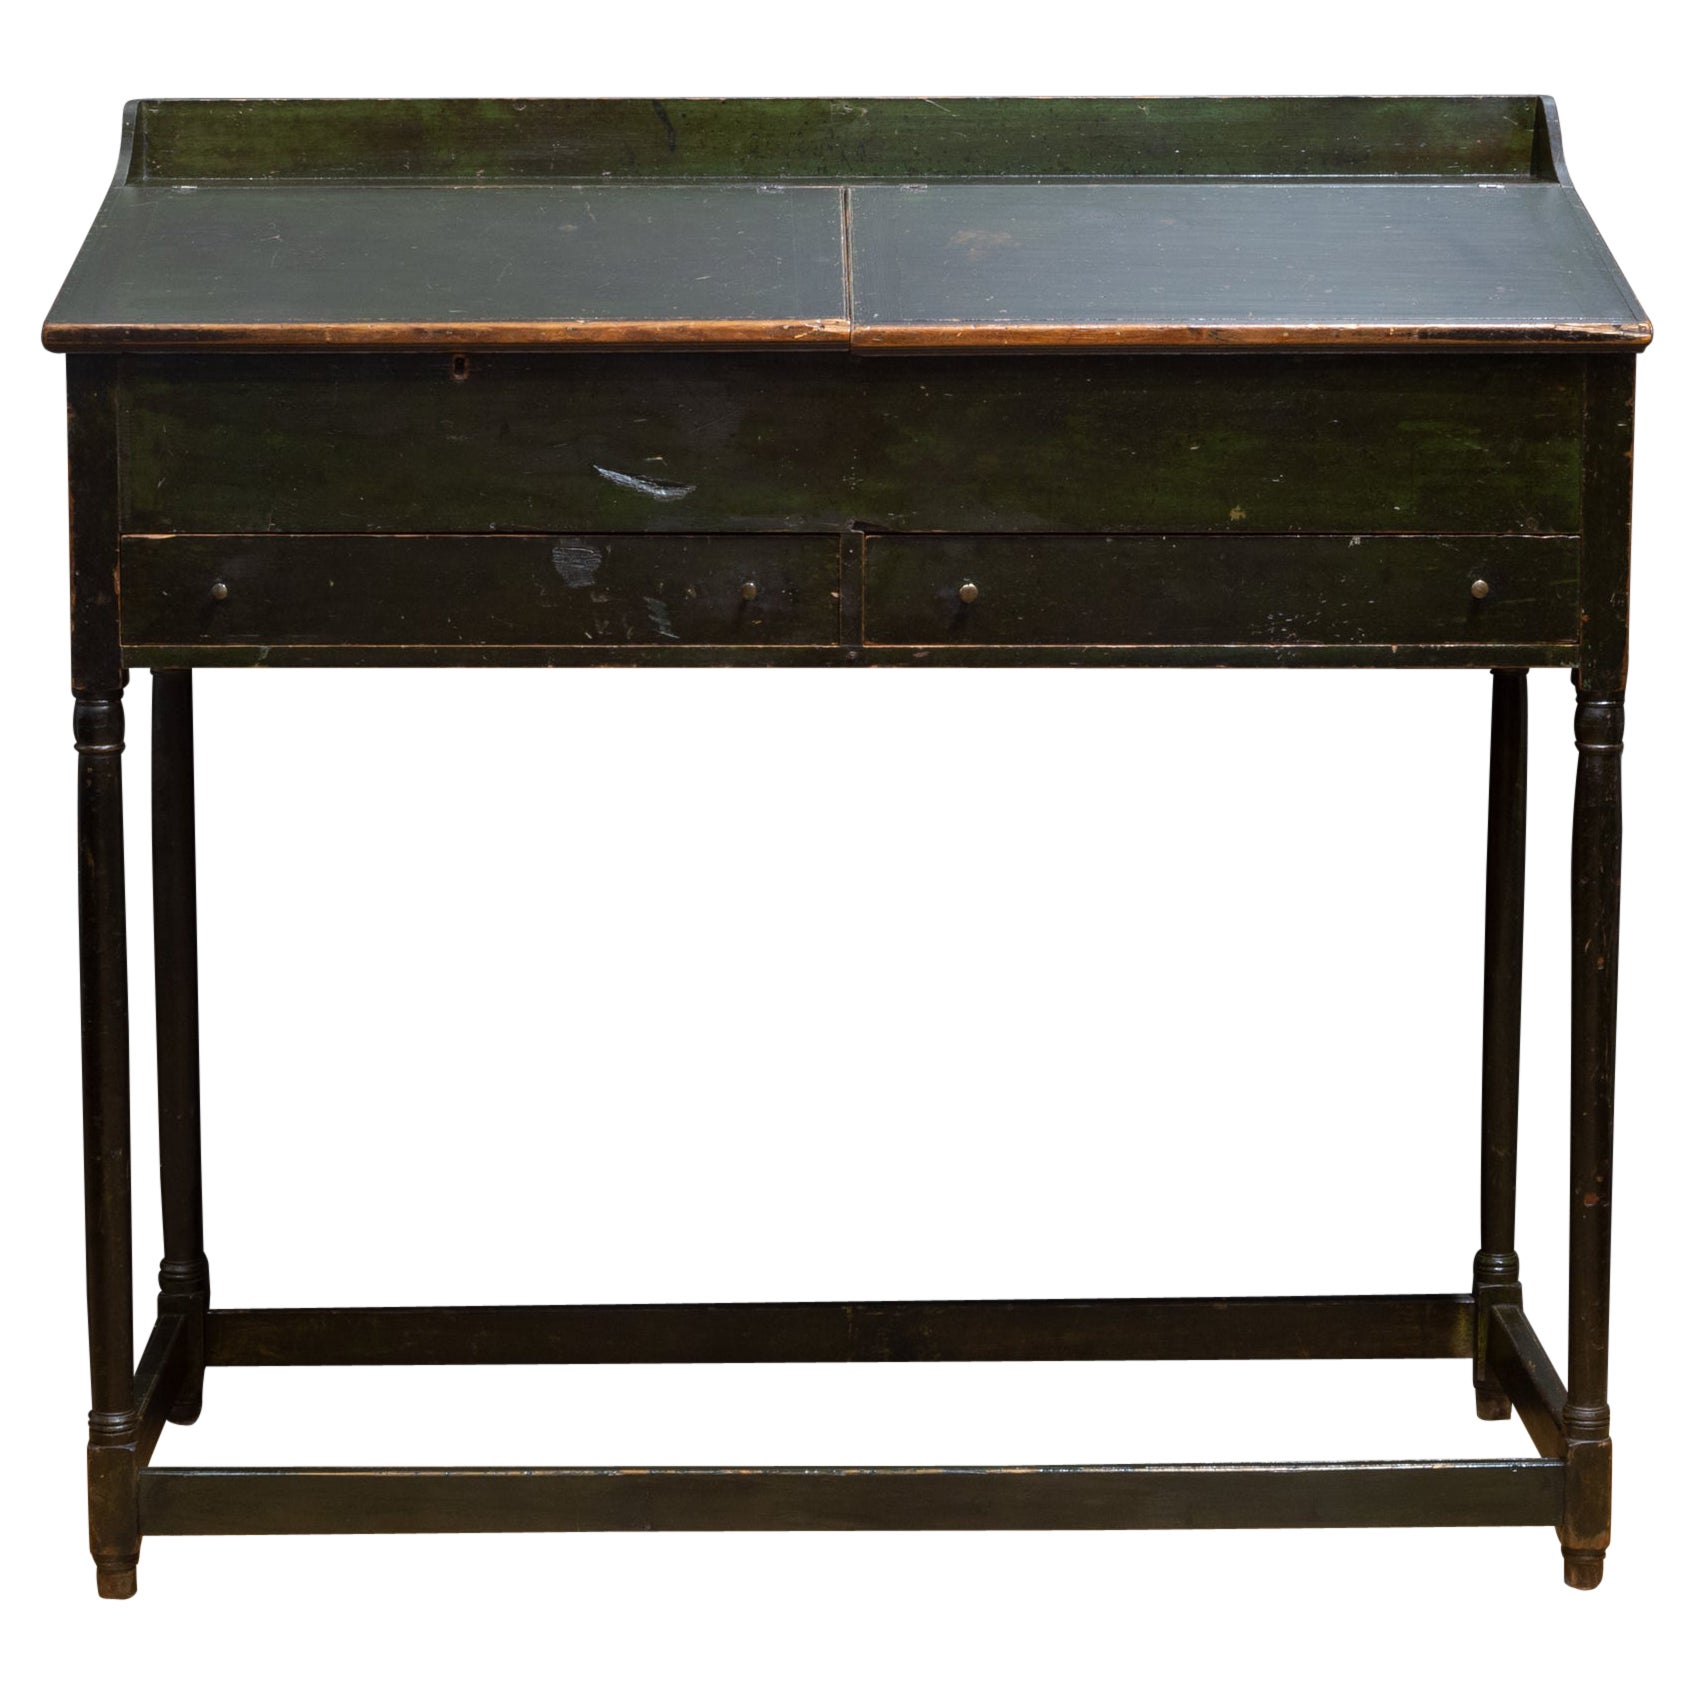 Mid 19th C. Postmaster's Desk, c.1850-Contact us for more affordable shipping 